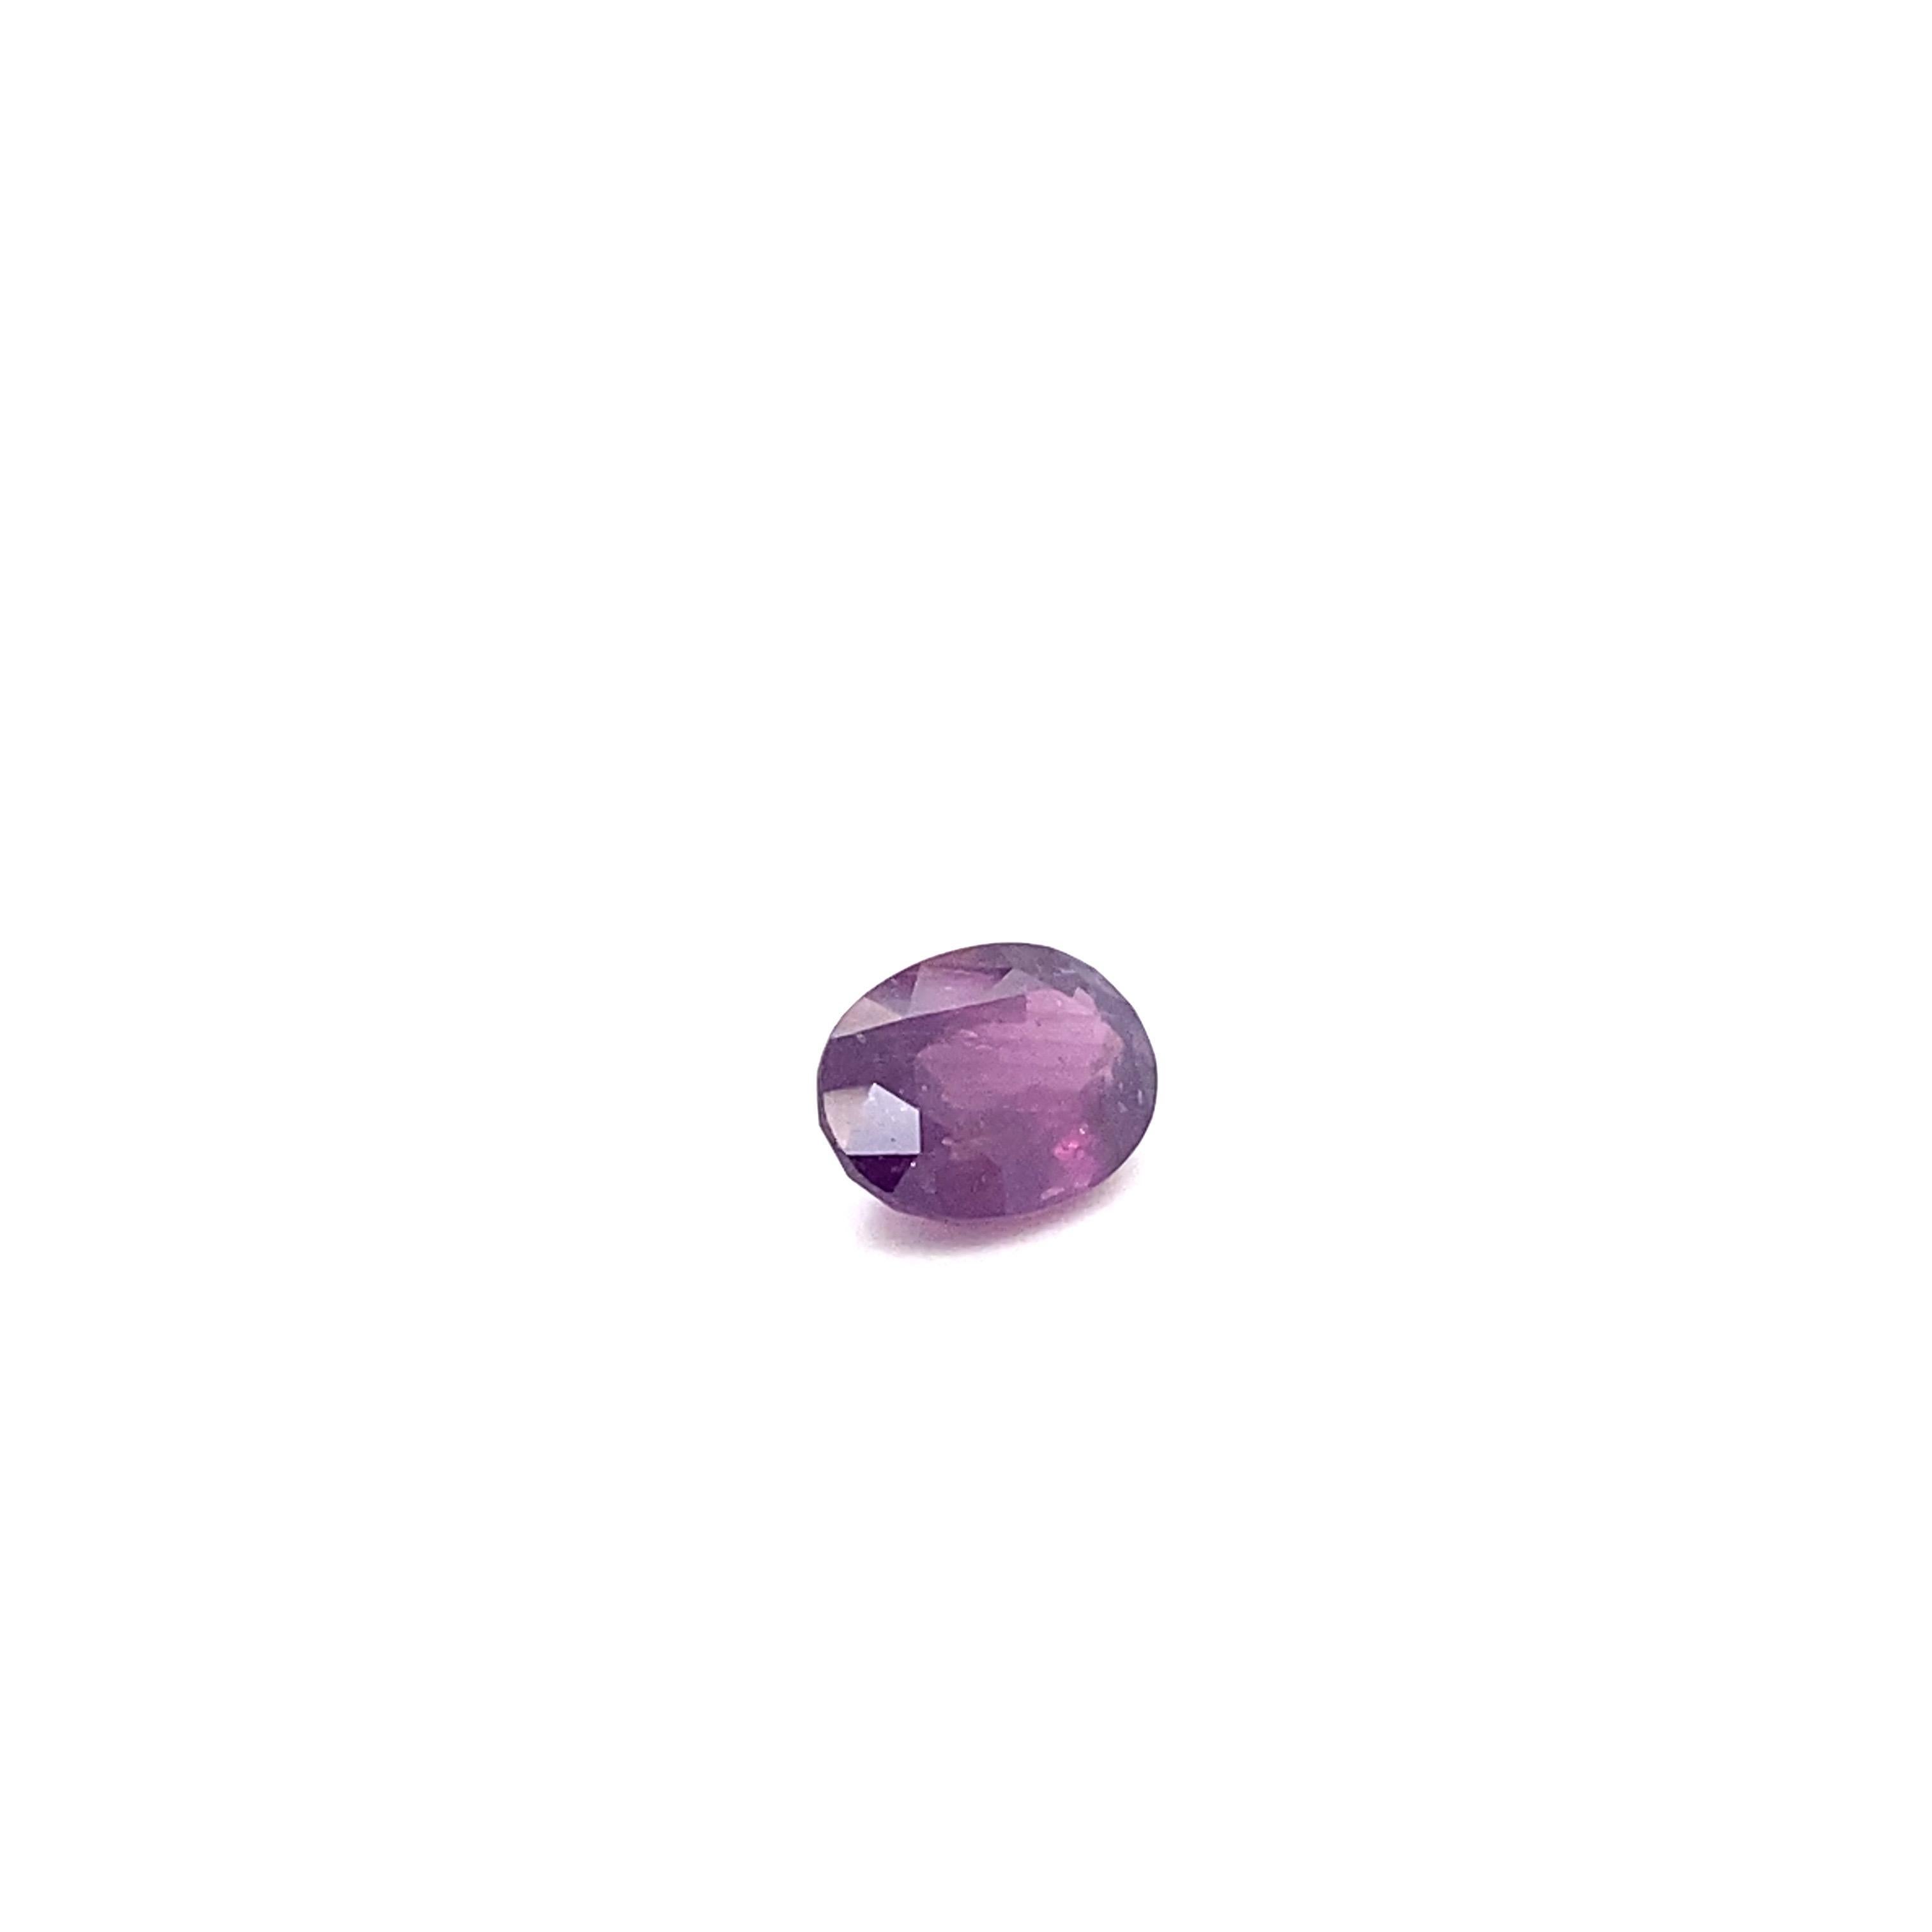 Oval Cut GIA Certified 5.94 Carat Oval Shape Natural Pink Purple Sapphire Loose Gemstone For Sale